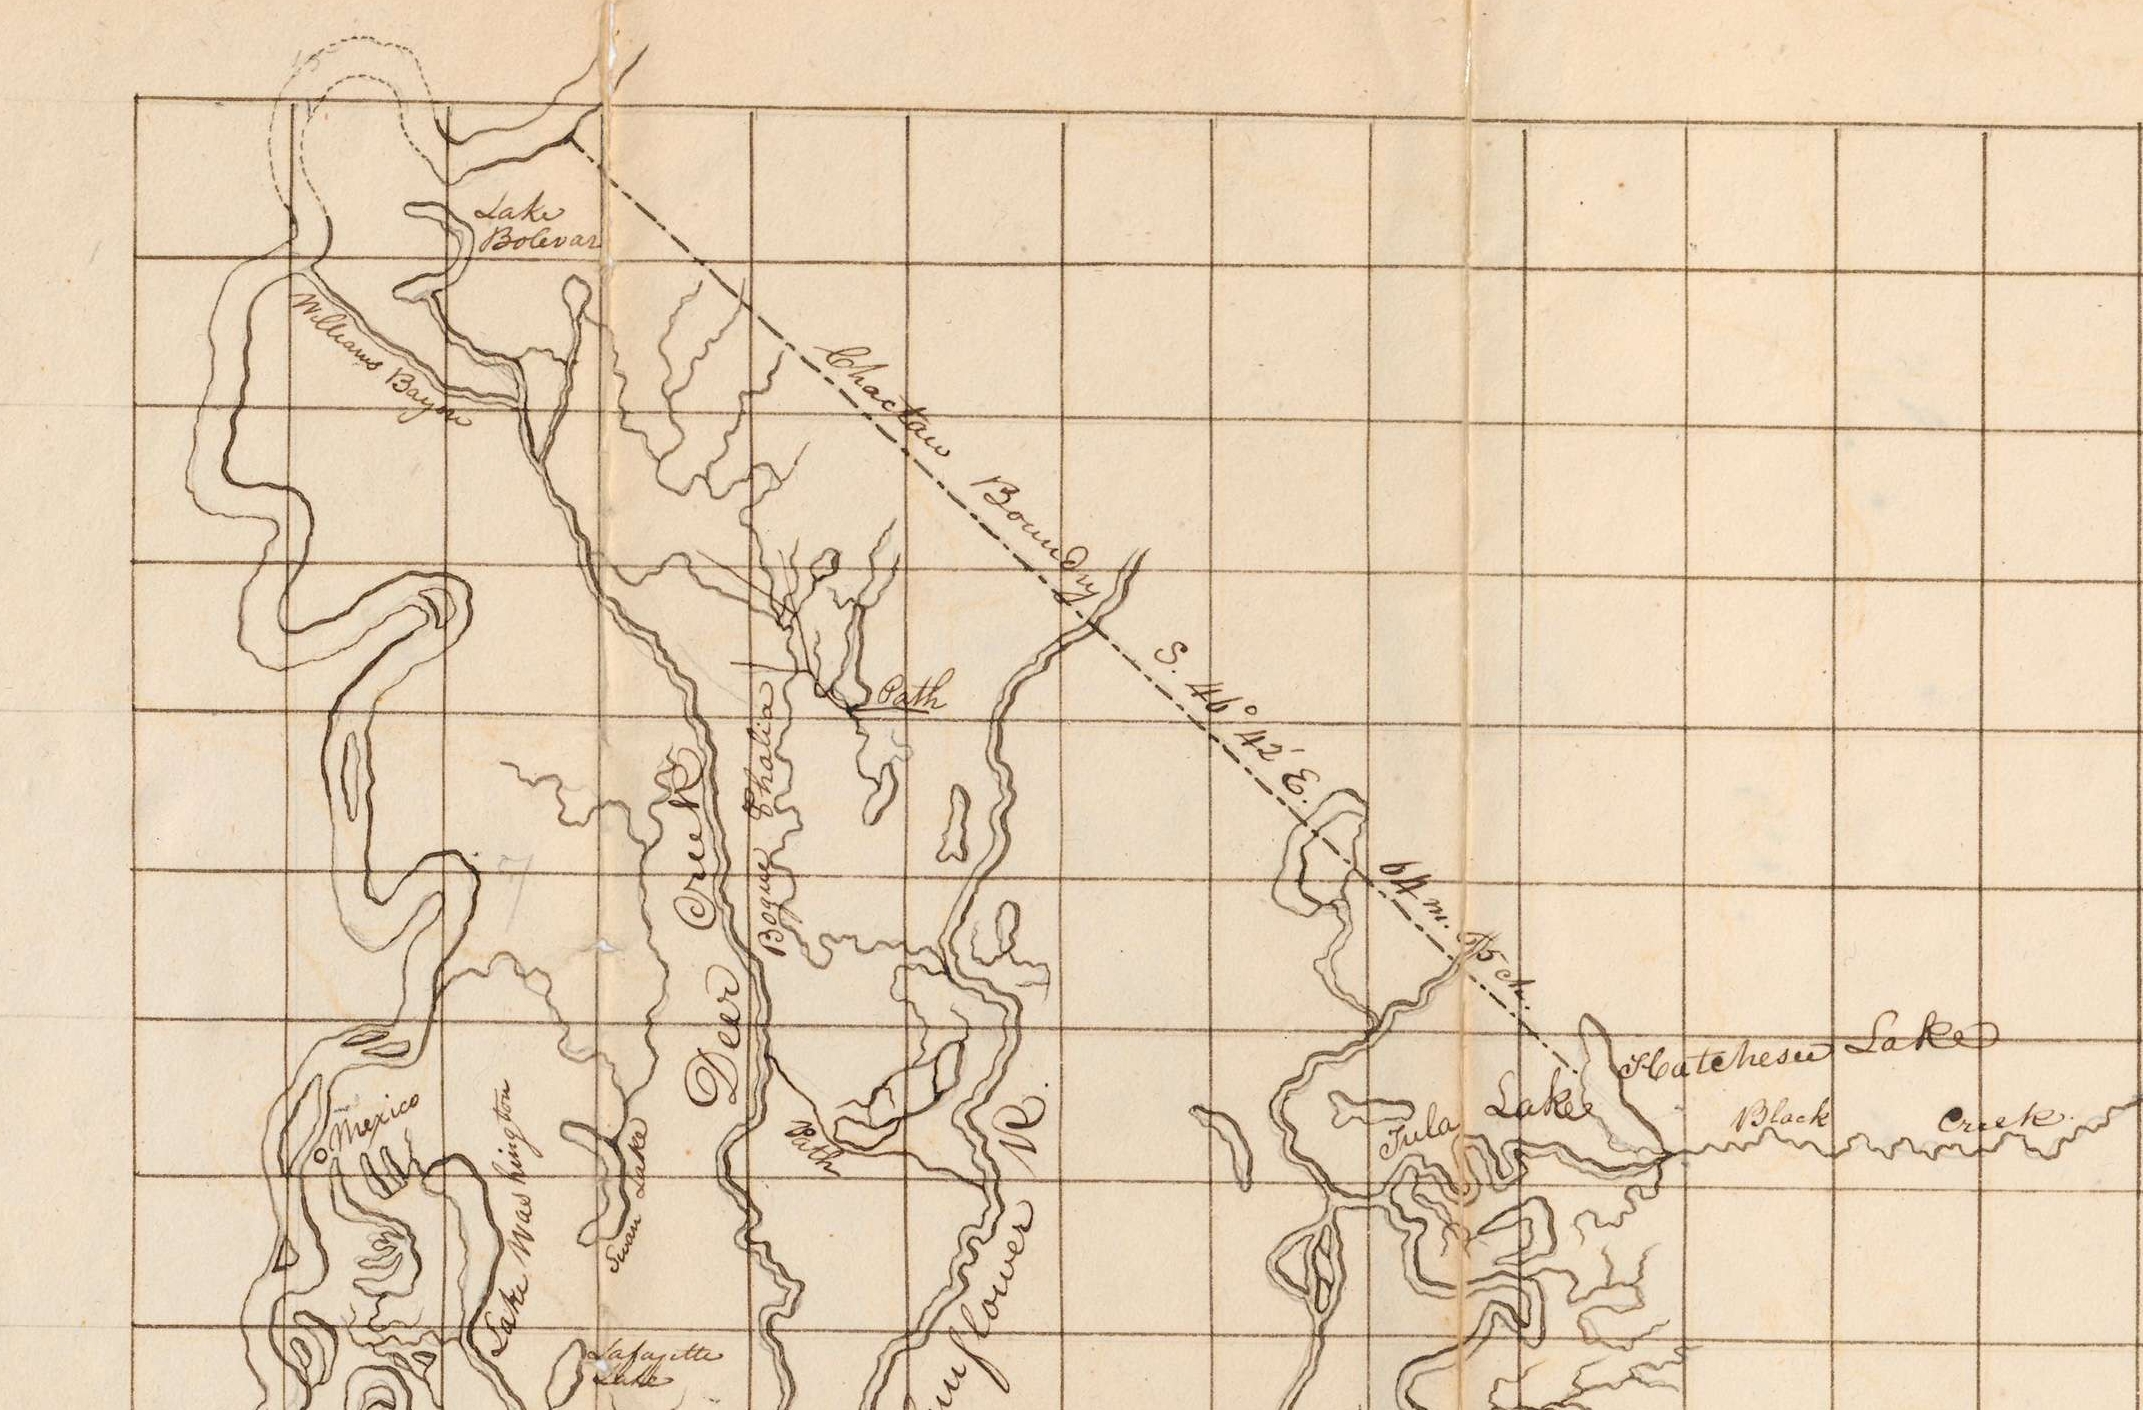 Journal and Map of Choctaw Removal